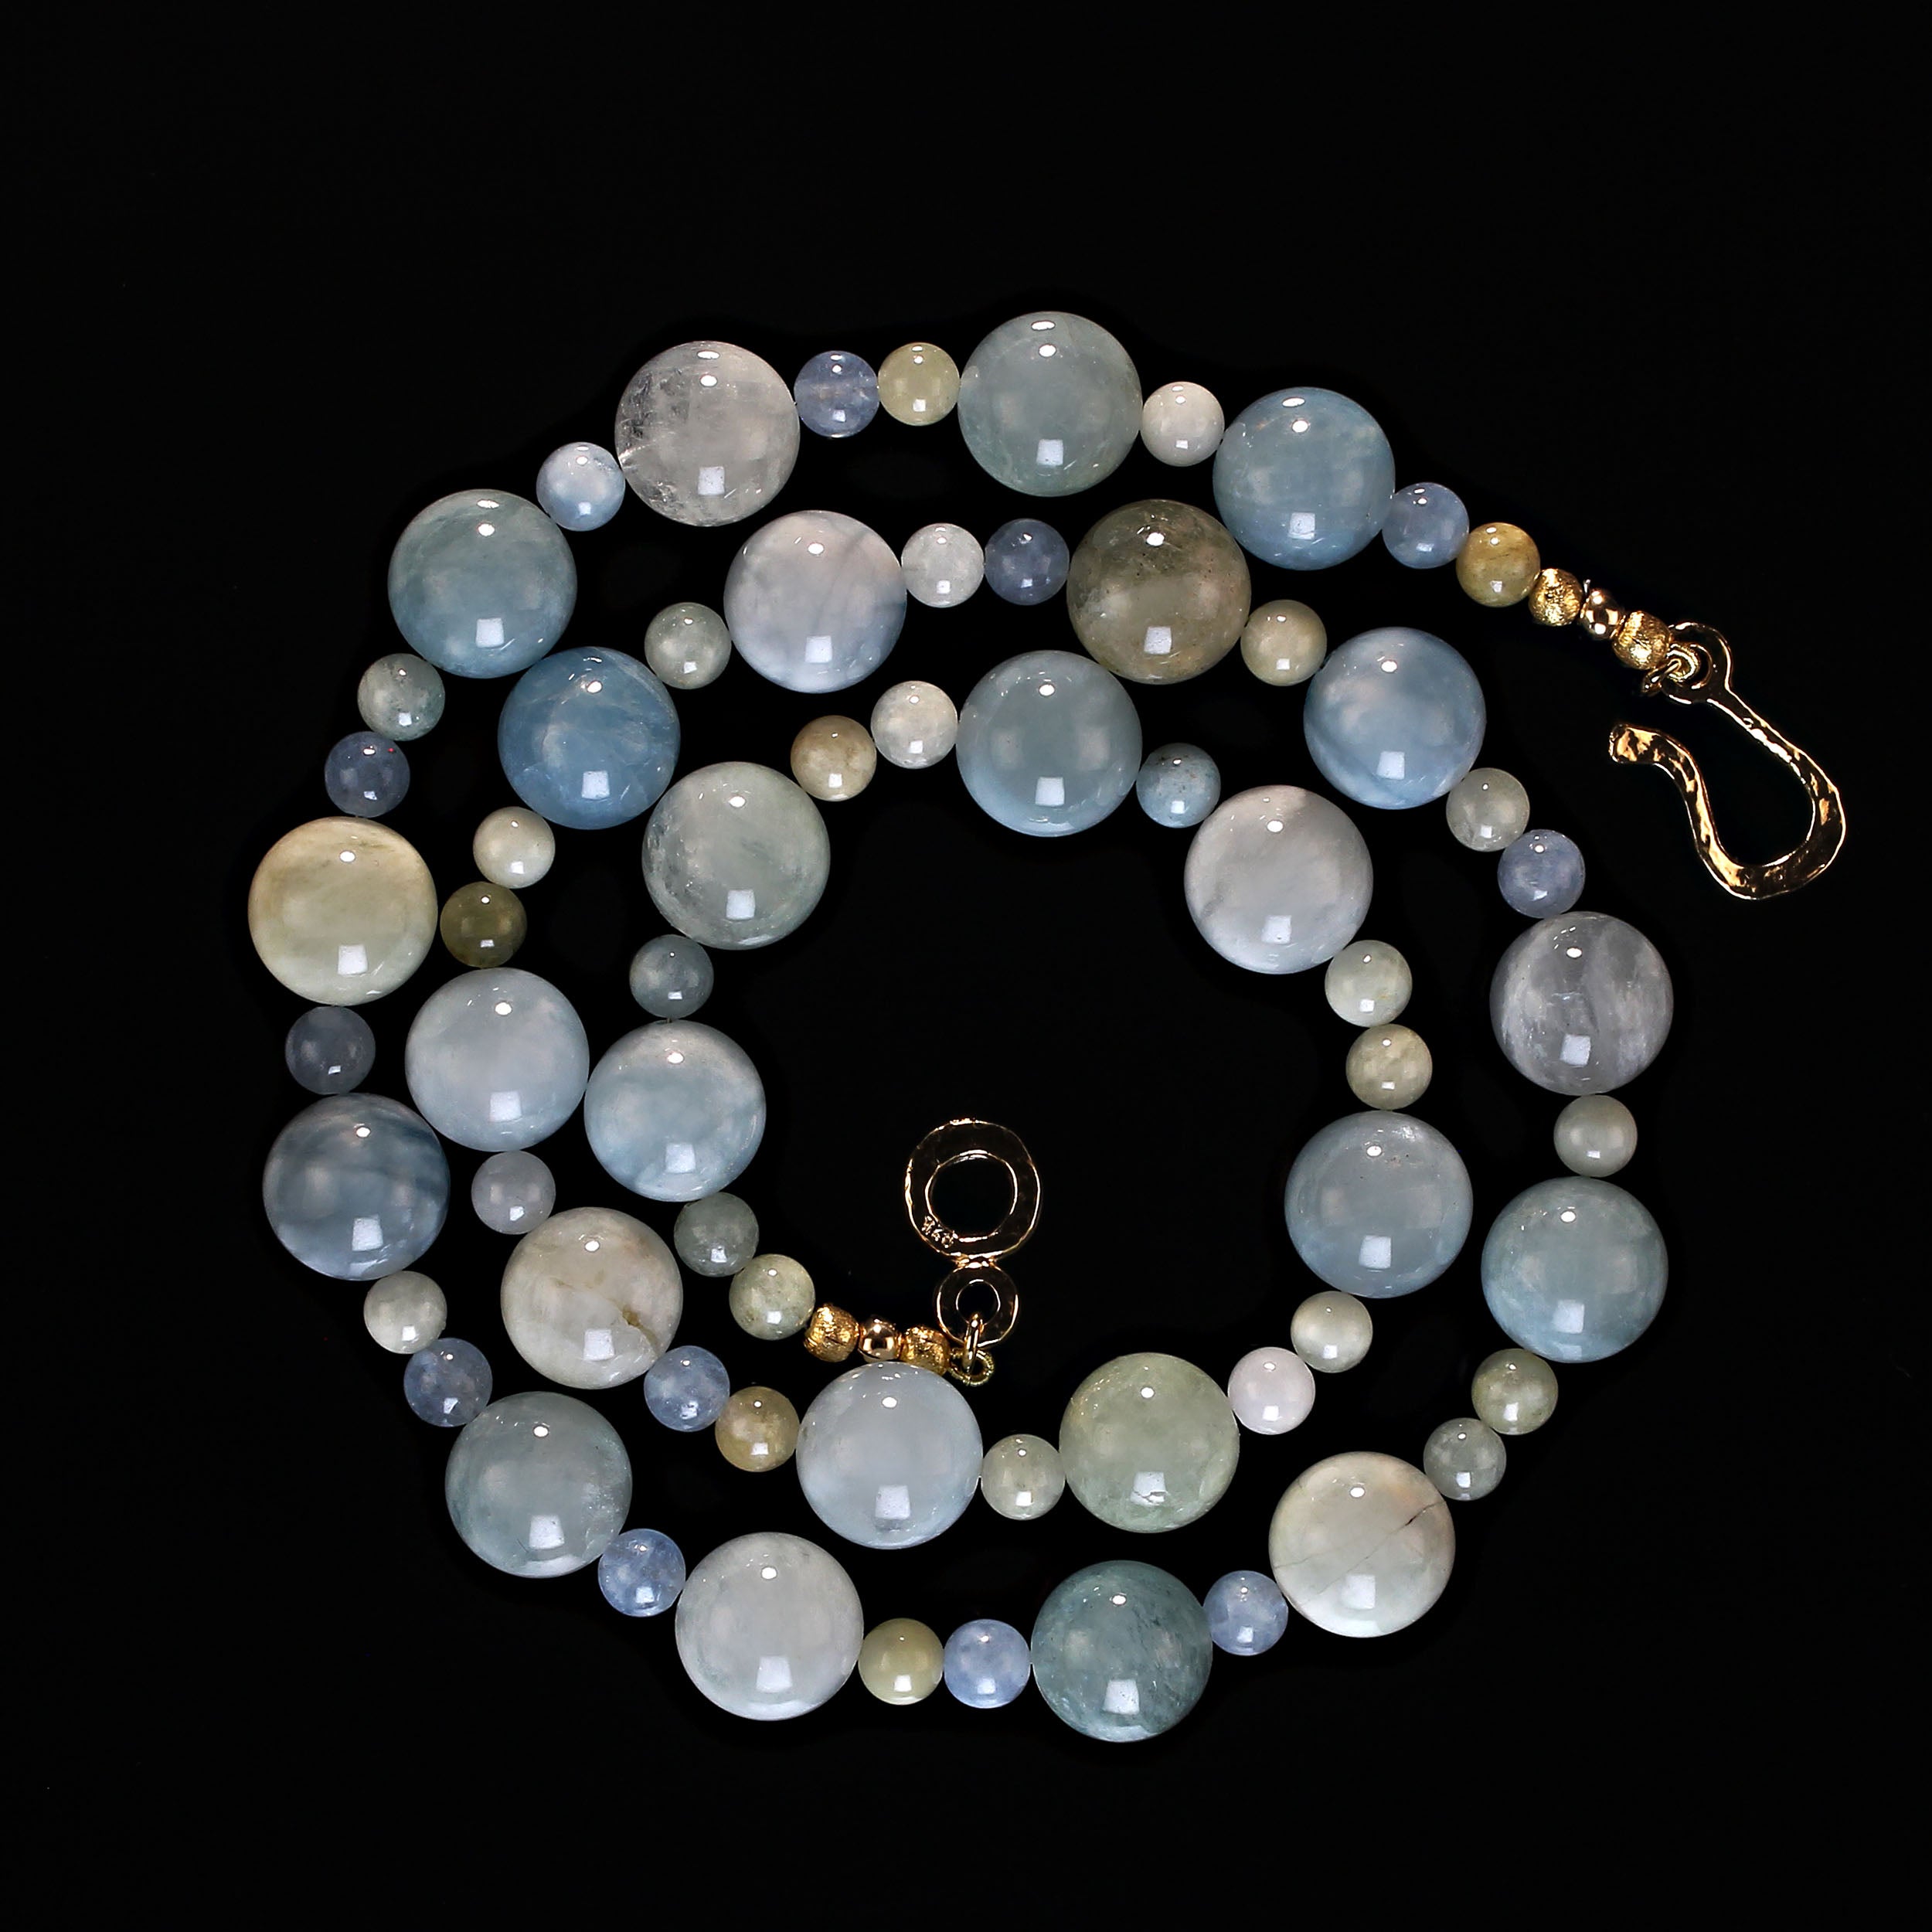 AJD 26 Inch Aquamarine-Beryl necklace in alternating shades of Blue and green